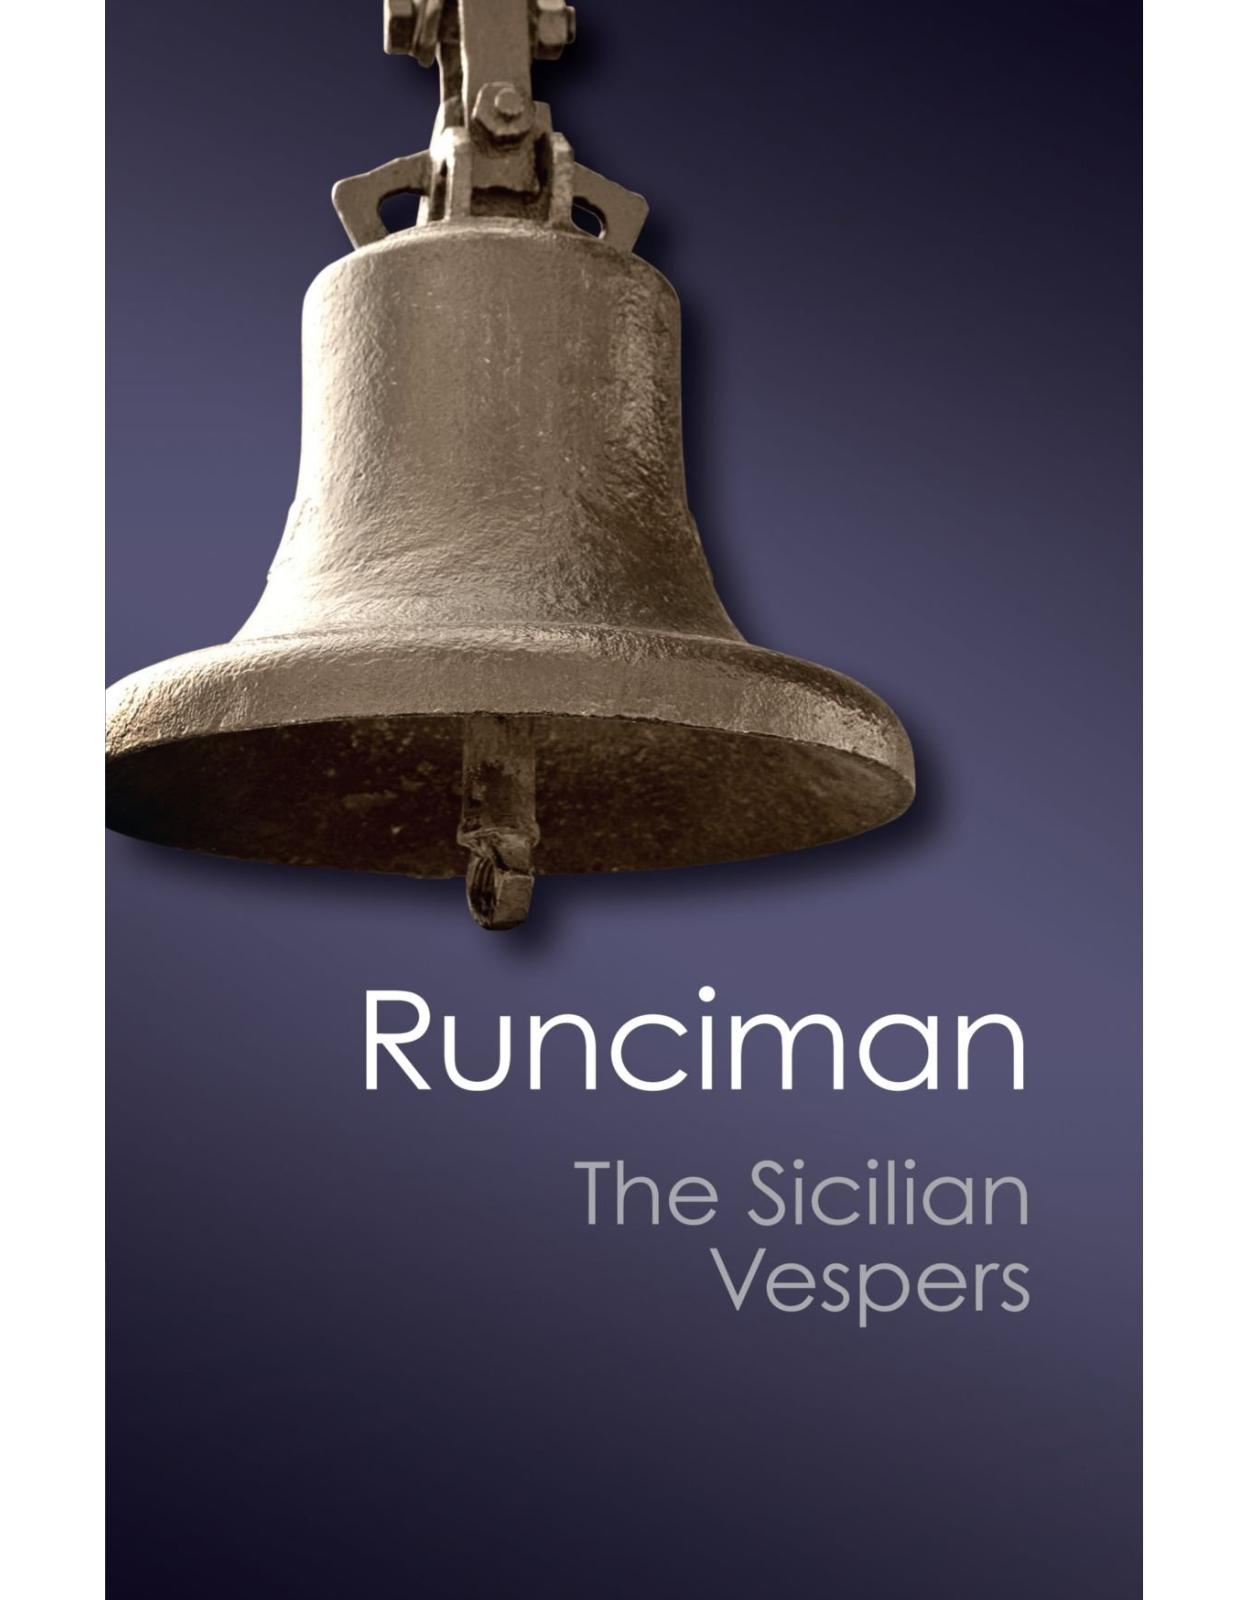 The Sicilian Vespers: A History of the Mediterranean World in the Later Thirteenth Century (Canto Classics)